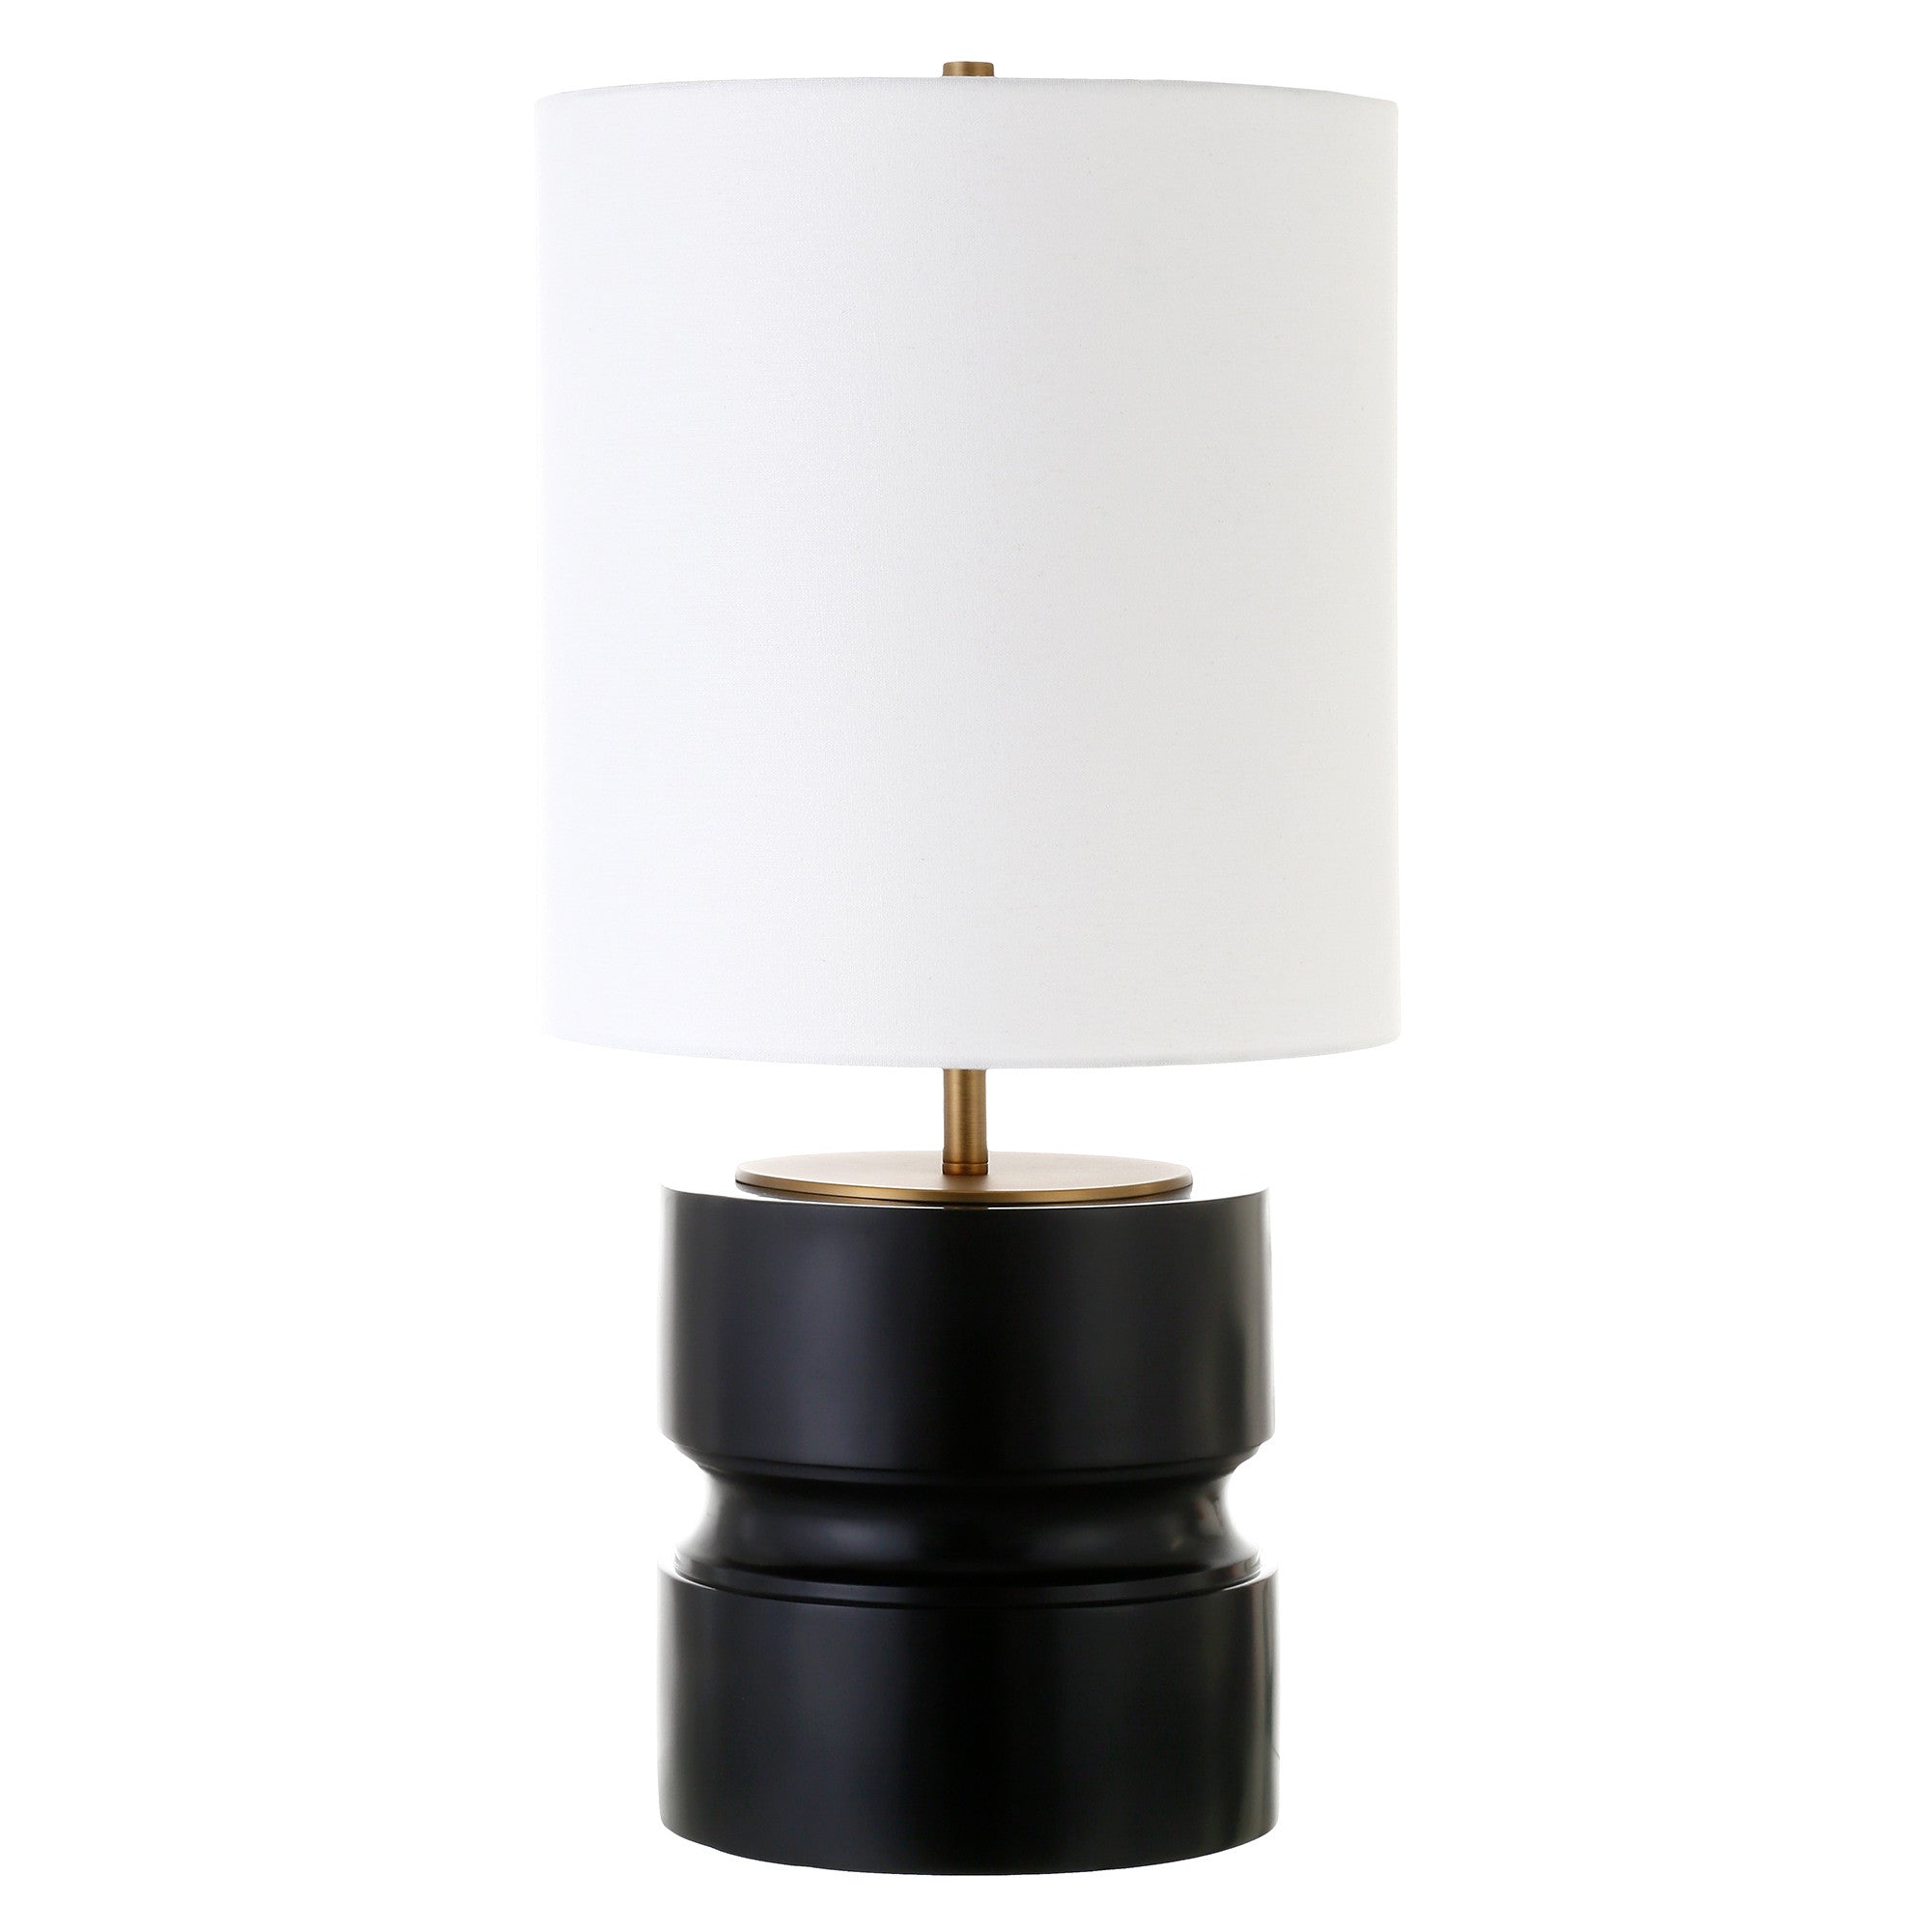 27" Black Metal Table Lamp With White Drum Shade